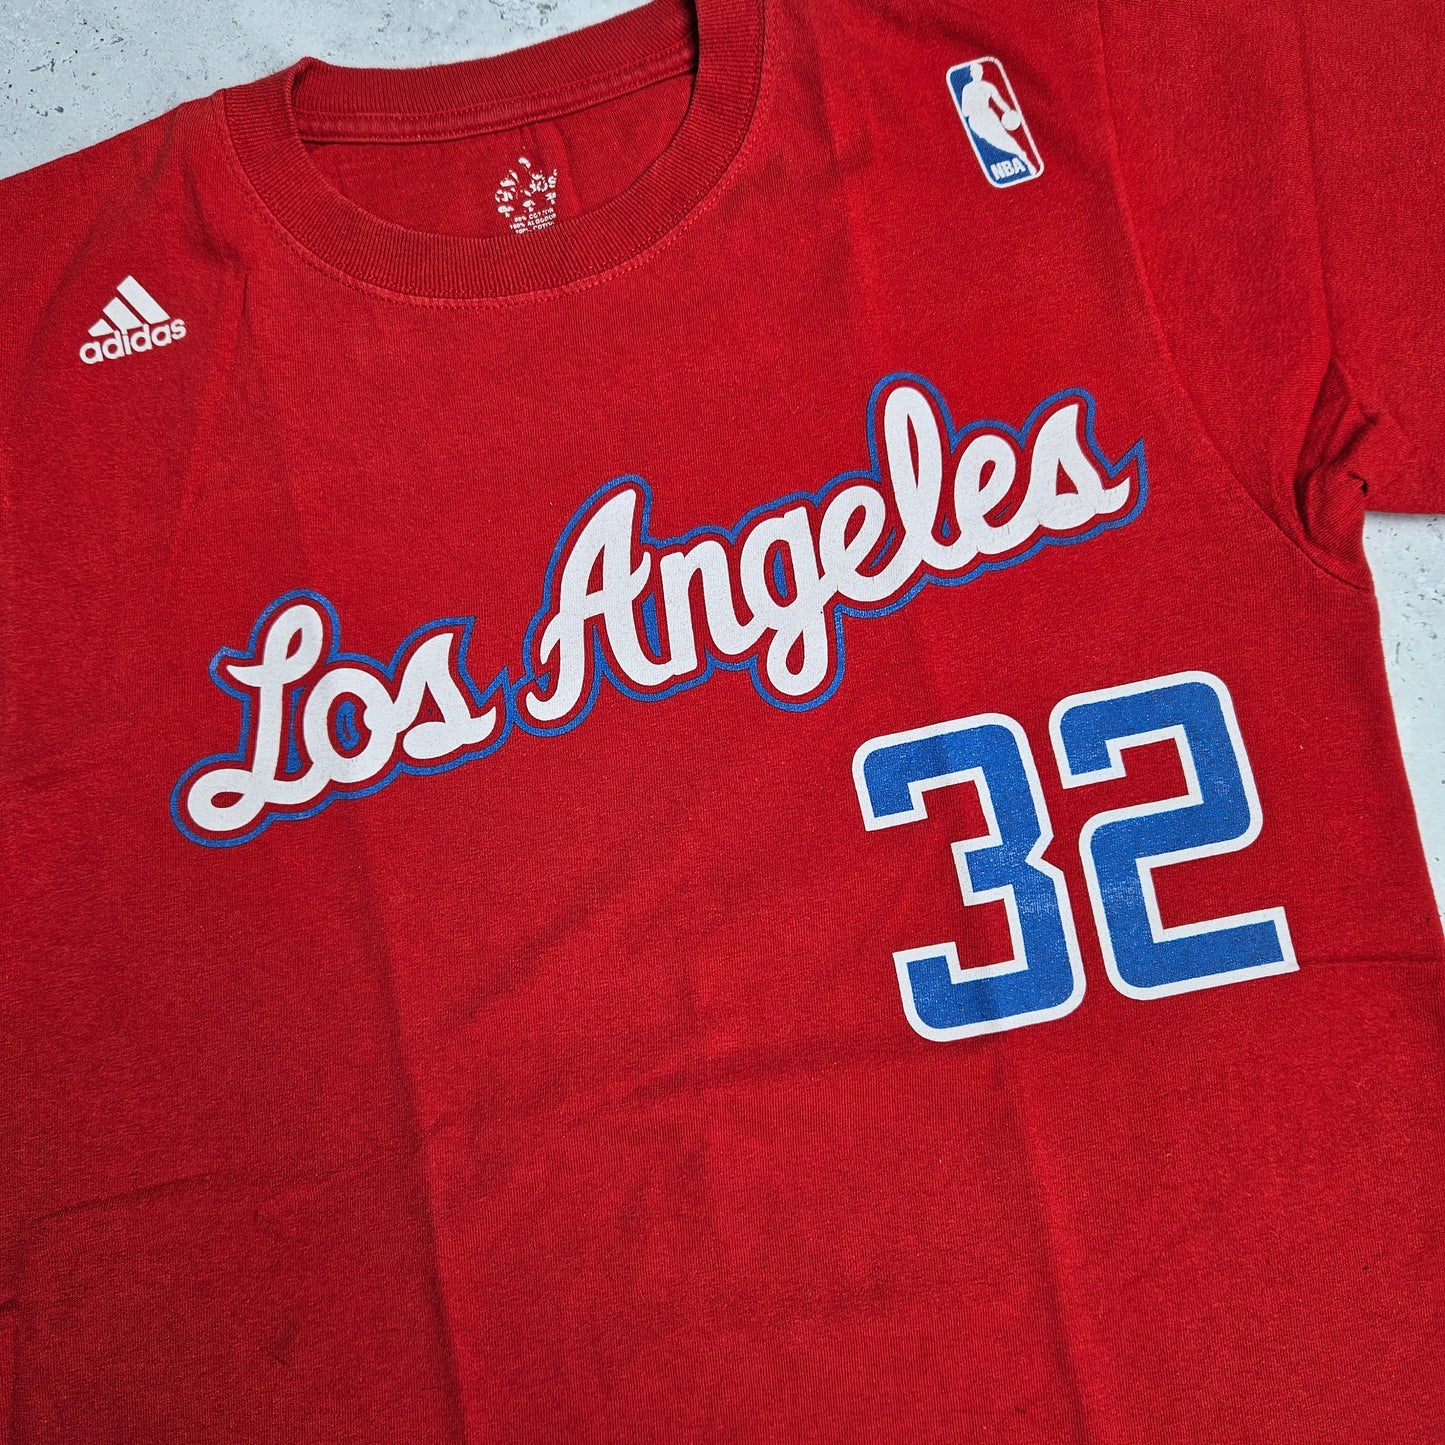 Los Angeles Clippers Blake Griffin T-shirt (M)